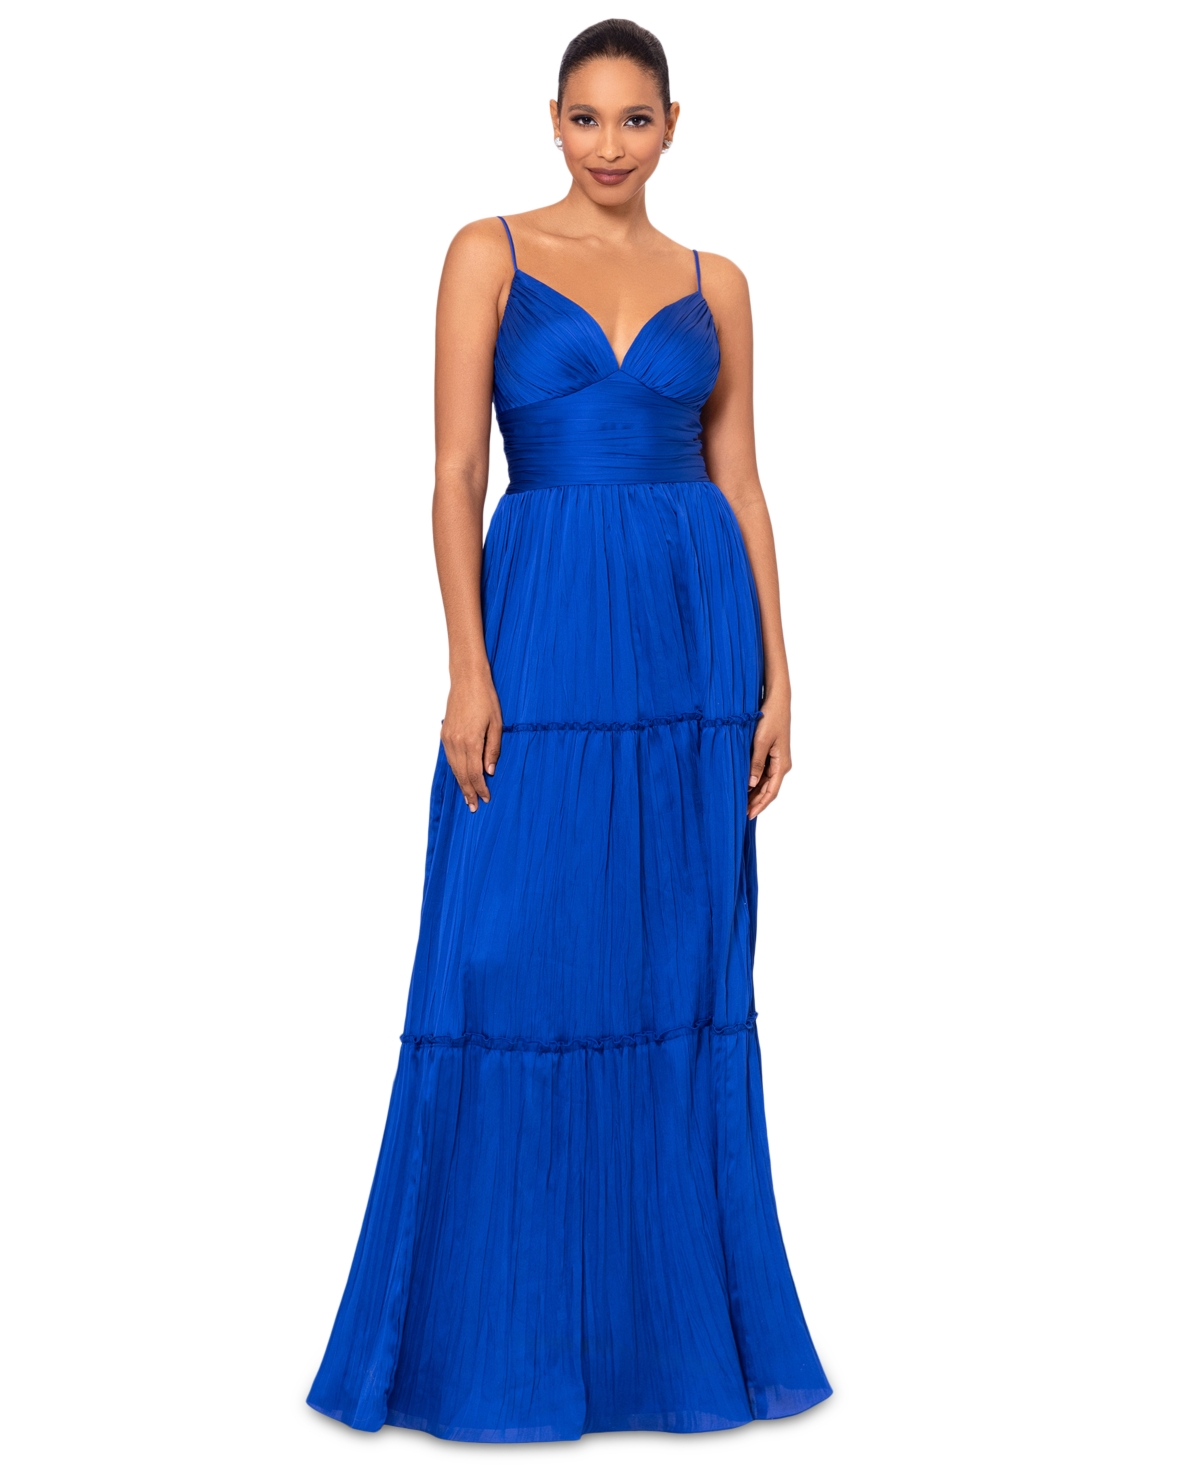 Women's Pleated Tiered Gown - Azure